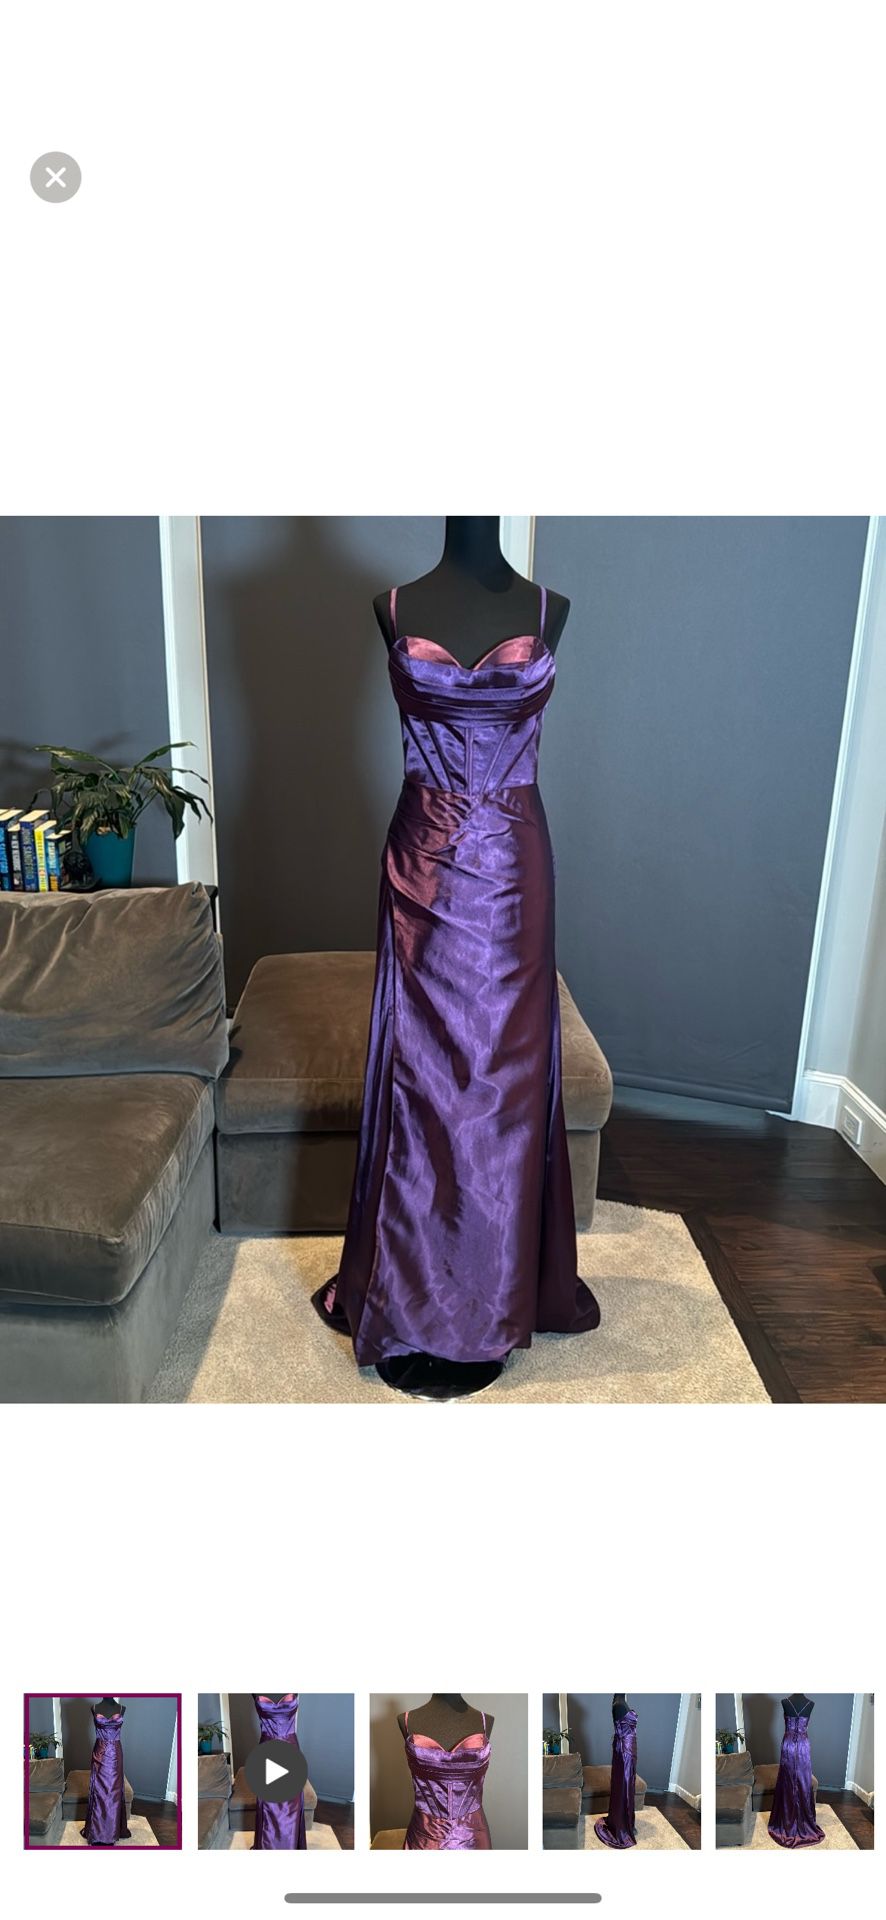 Women’s Purple Full Length Dress with Criss Cross Corset Back Straps and a front Leg Slit Size 6